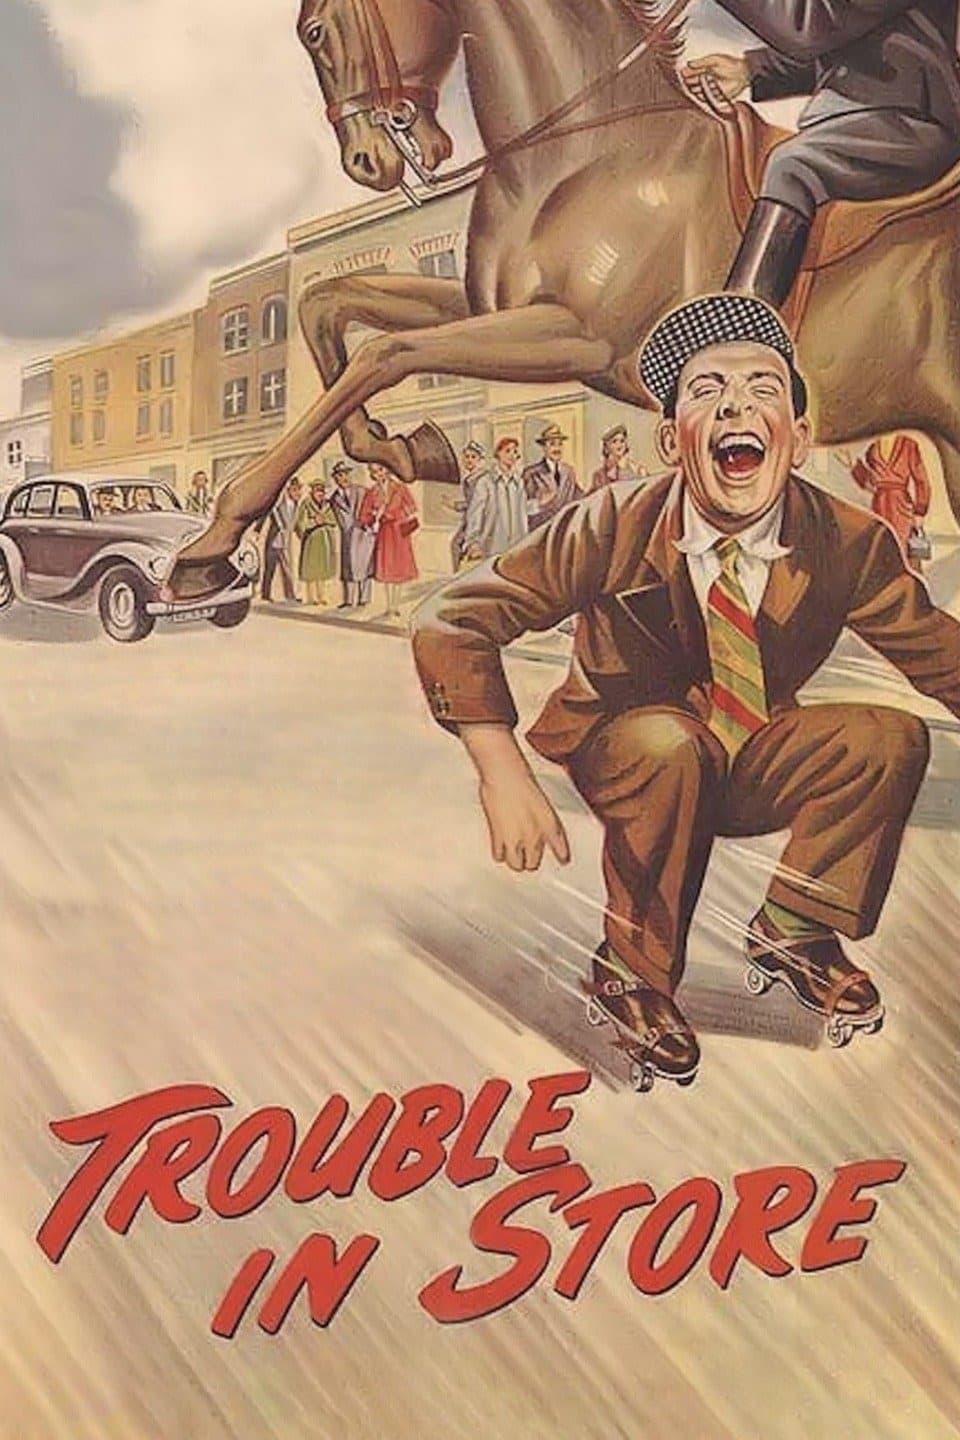 Trouble in Store poster